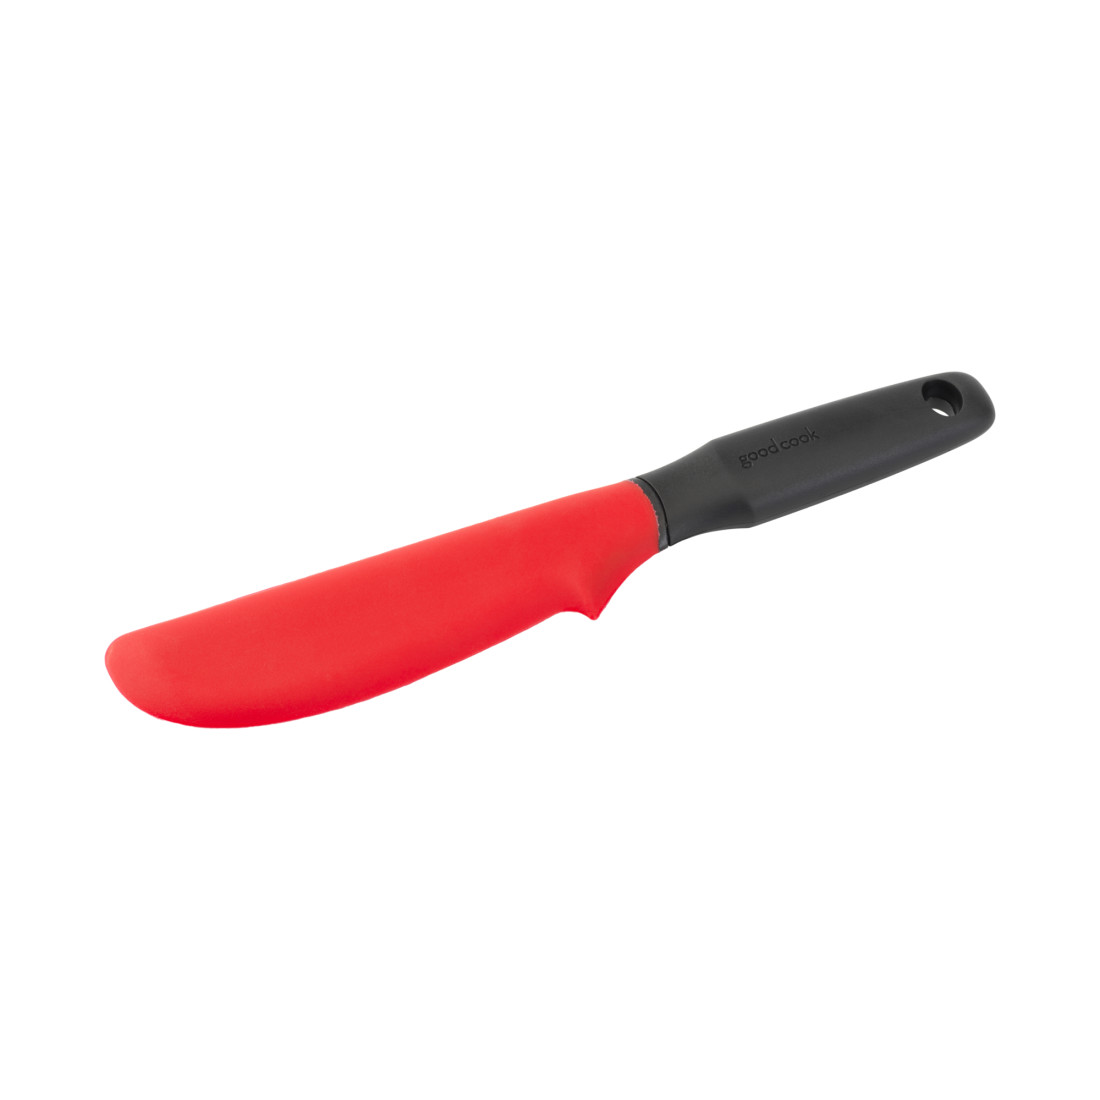 The Best, Strongest Silicone Spatula for Icing Mixing - Dishwasher